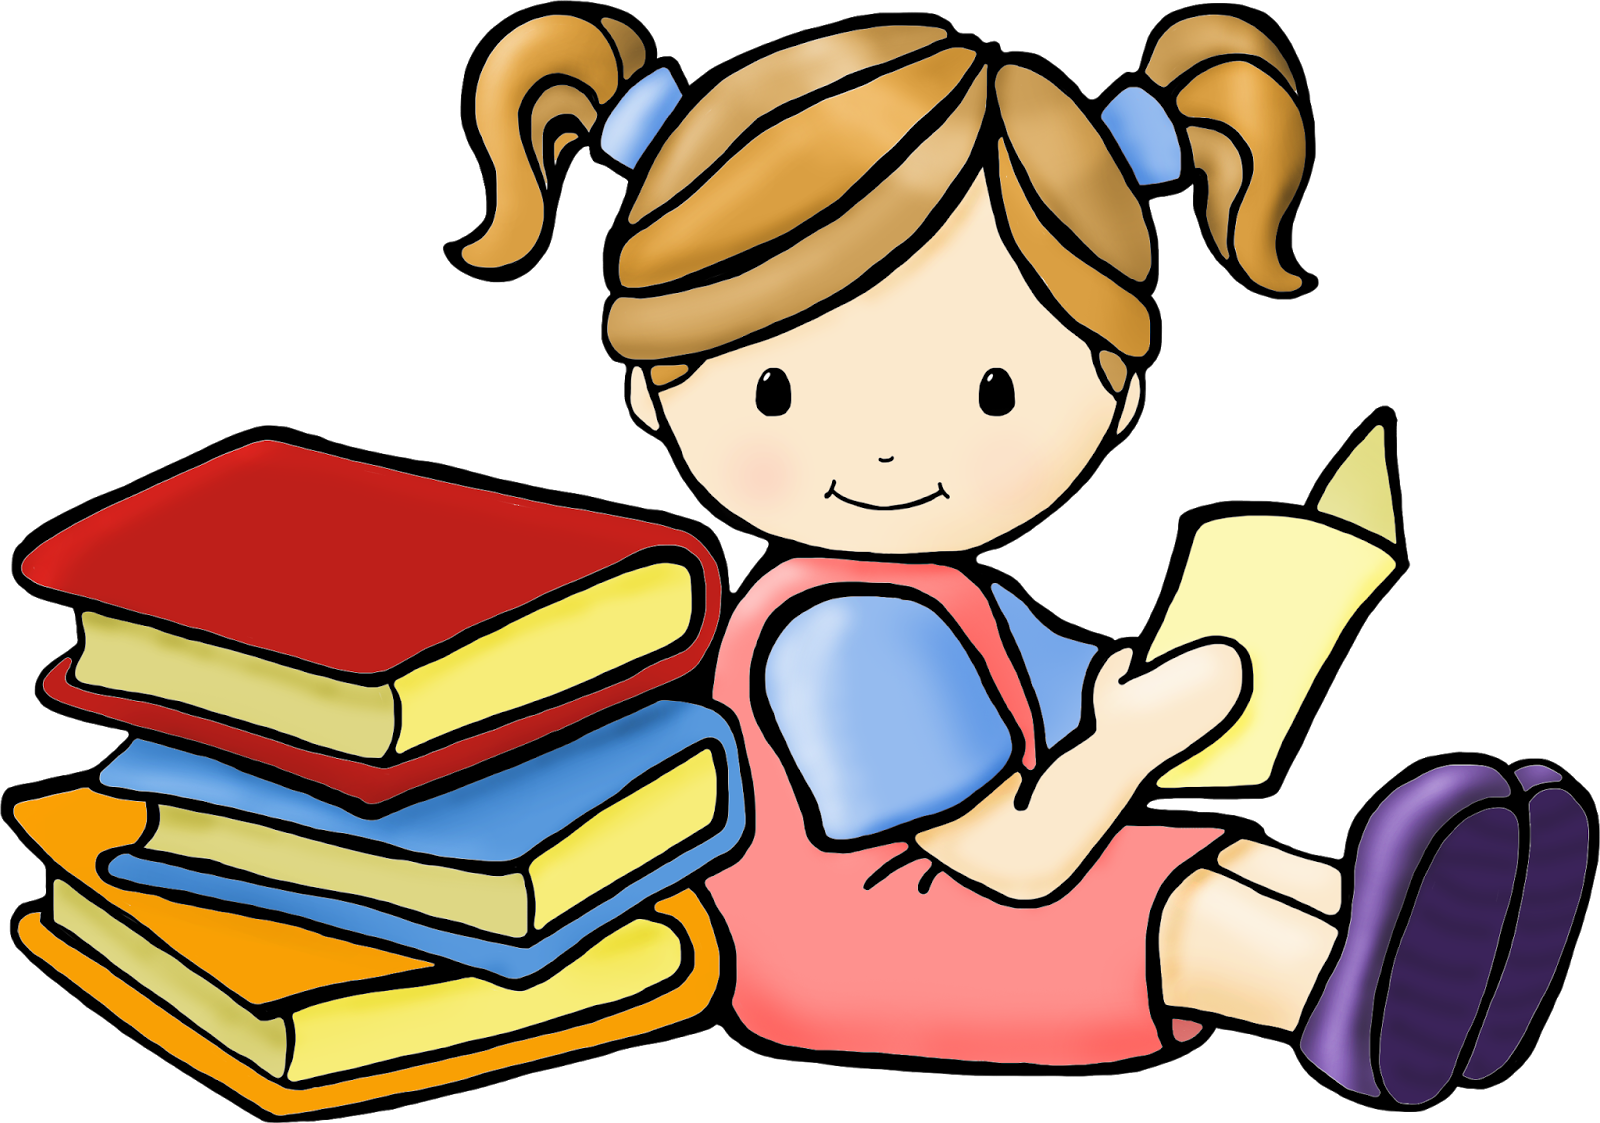 The cute girl is sitting together with her orange, red and blue colored books.
